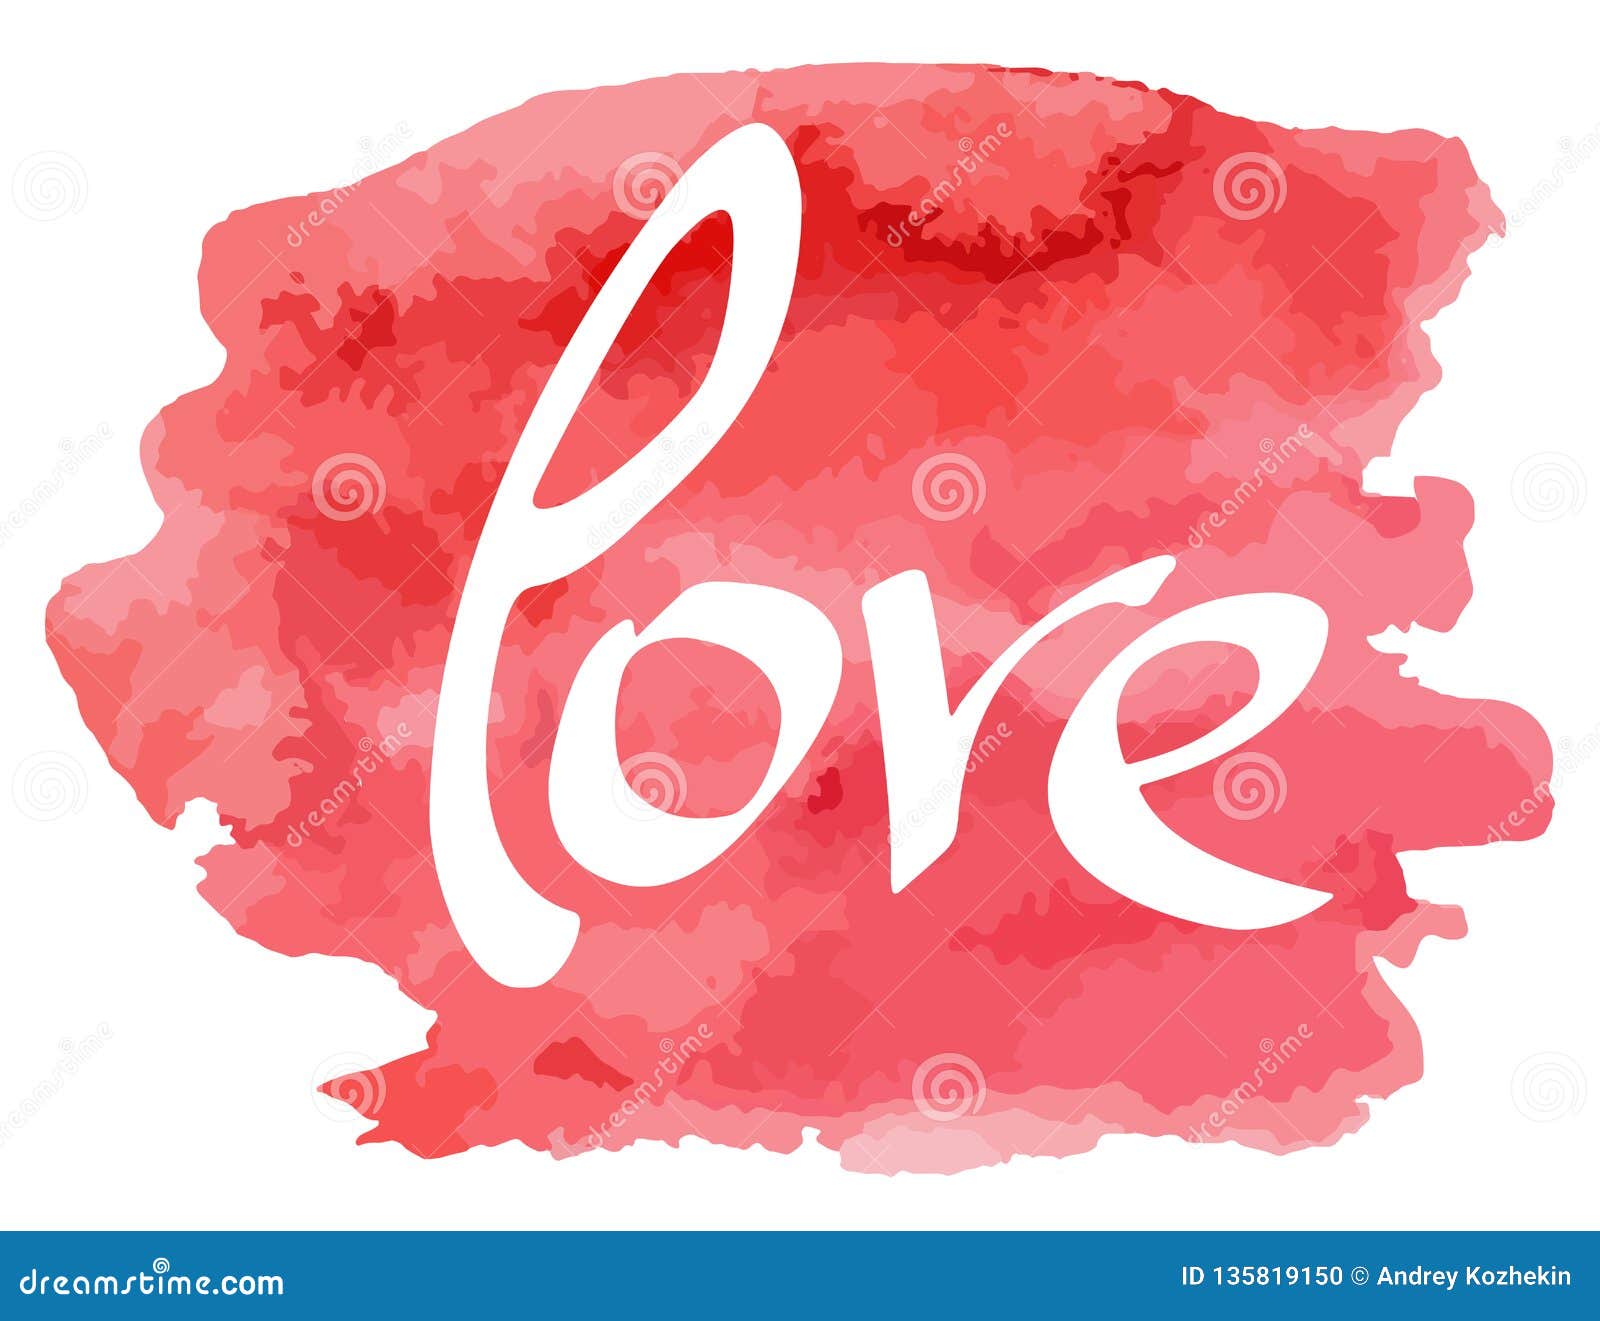 Hand Made Lettering Word Love on Watercolor Imitation Color Splash Over ...